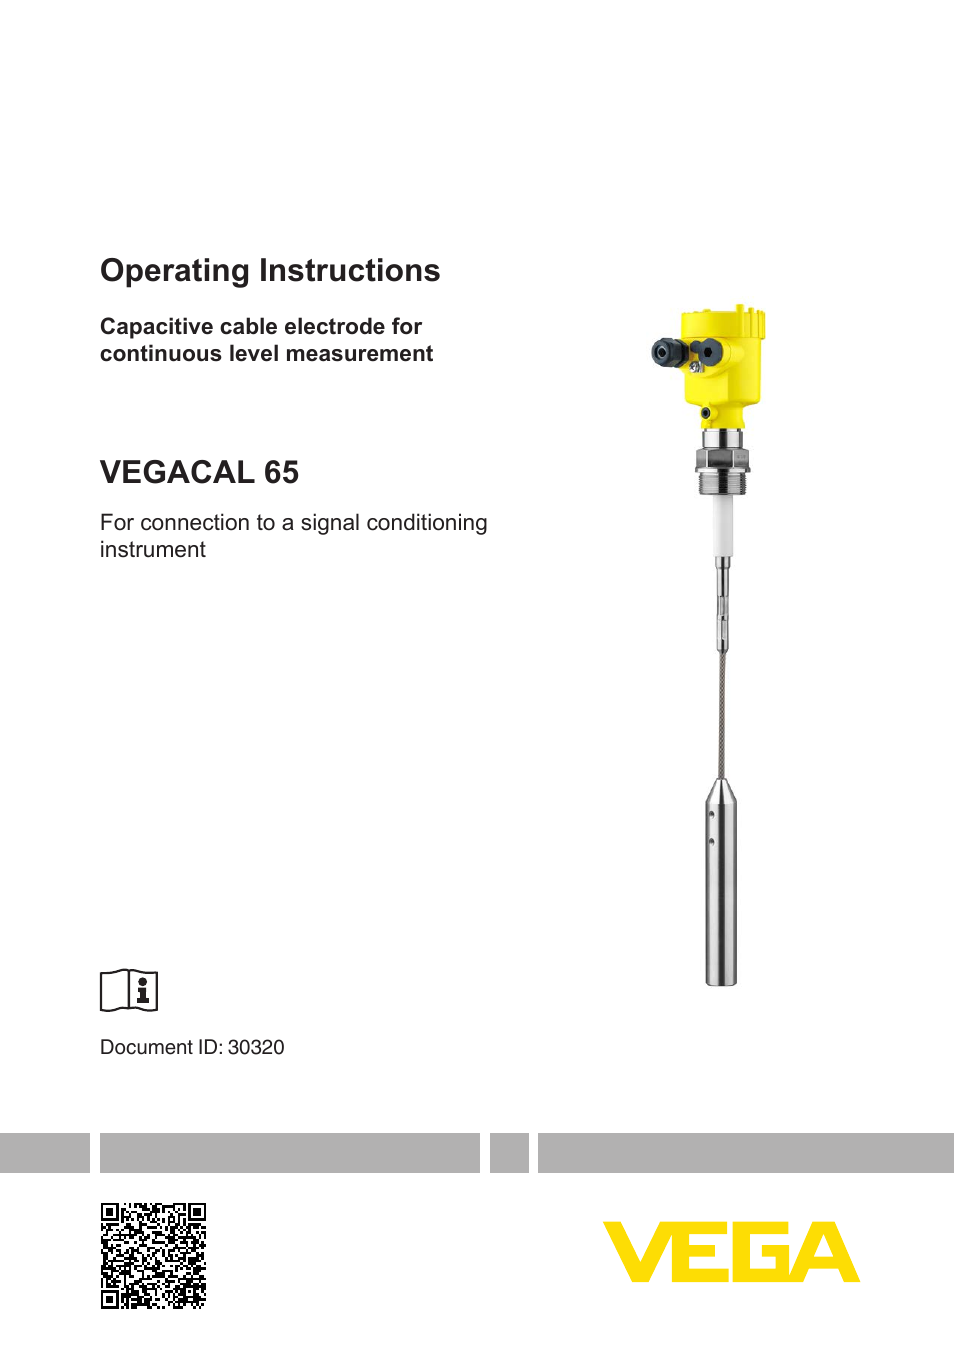 VEGACAL 65 For connection to a signal conditioning instrument